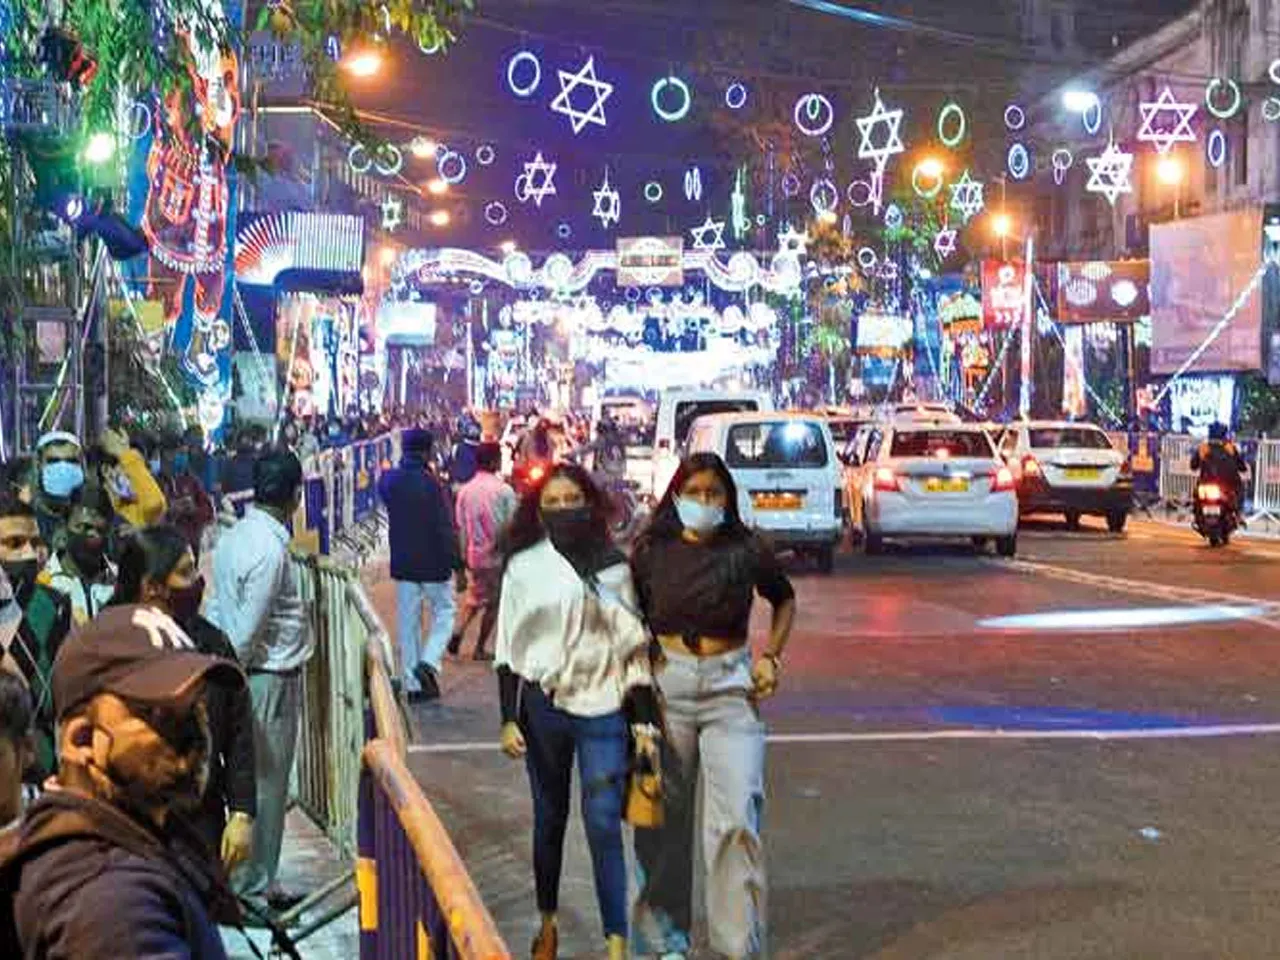 Two days after the arrival of the new year, the metropolis was surrounded by tight security